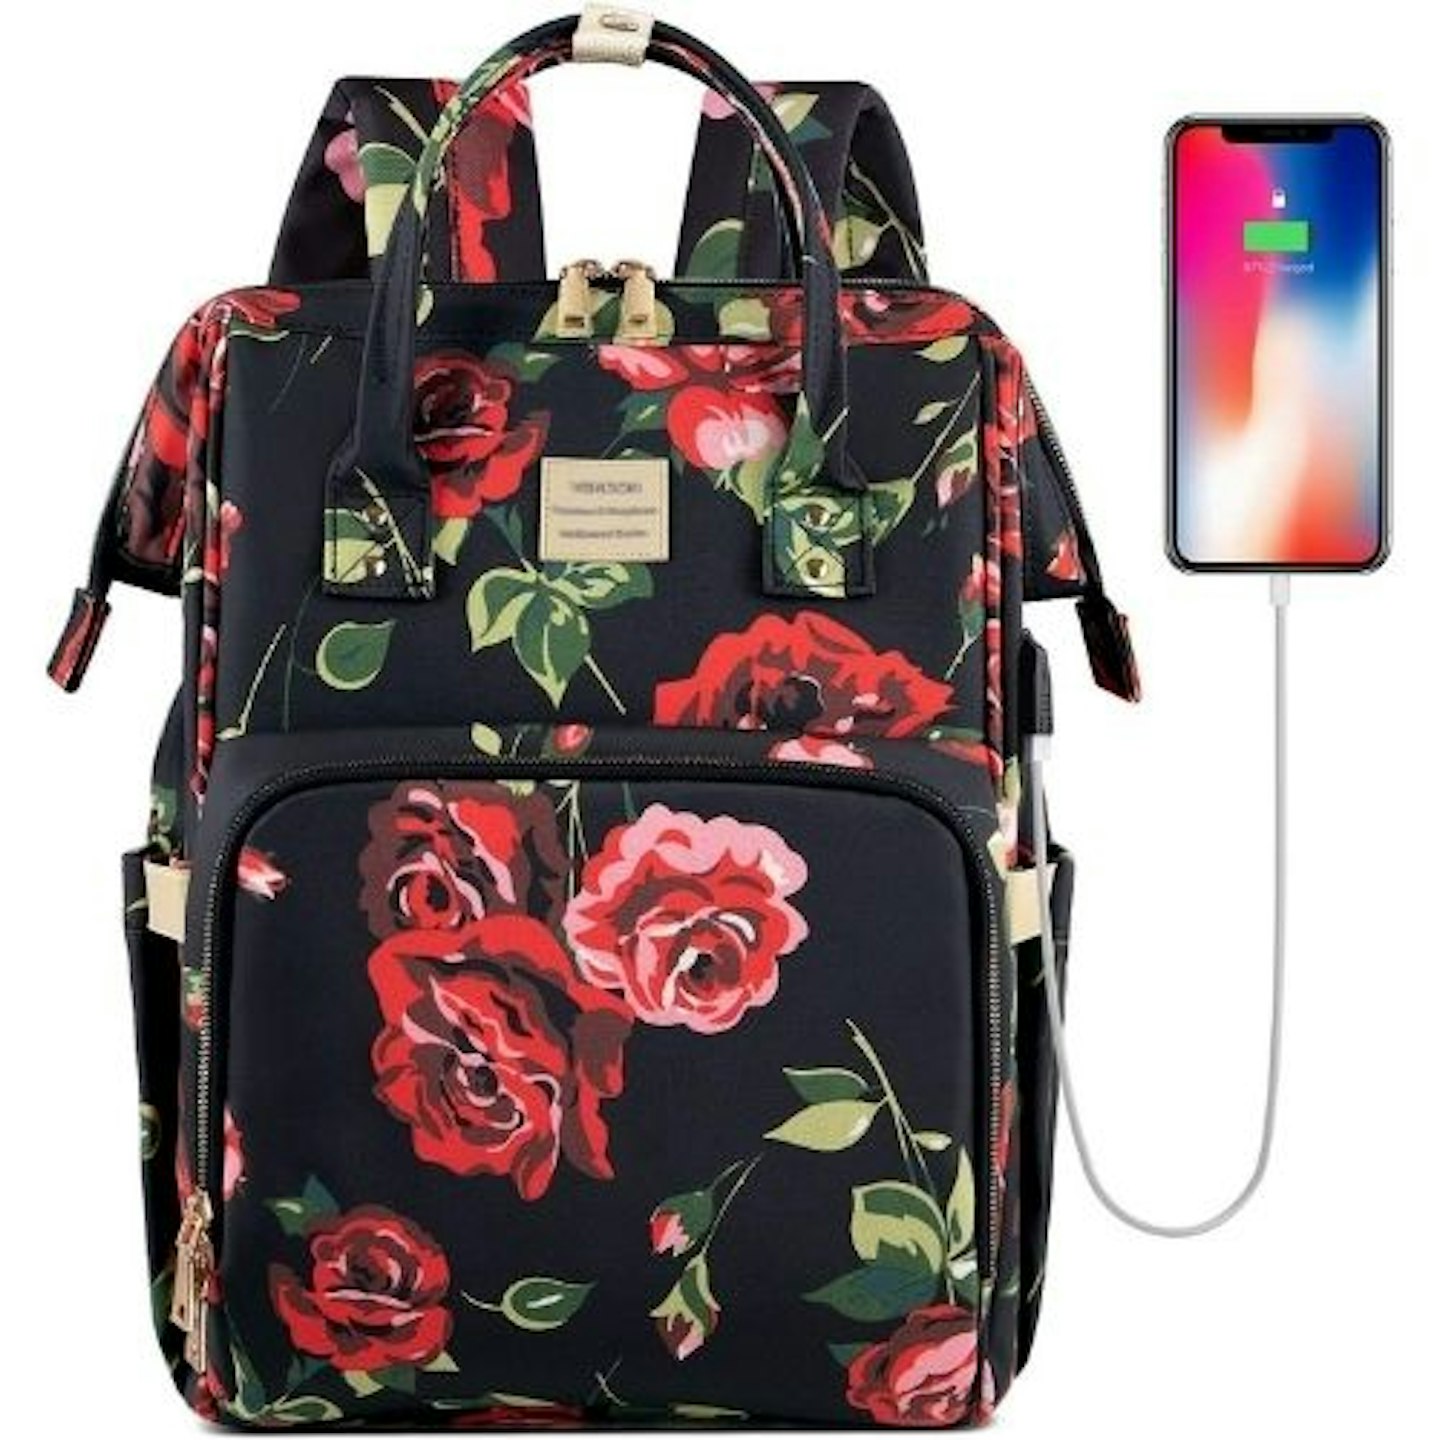 Laptop Backpack 15.6 Inch Stylish School Backpack